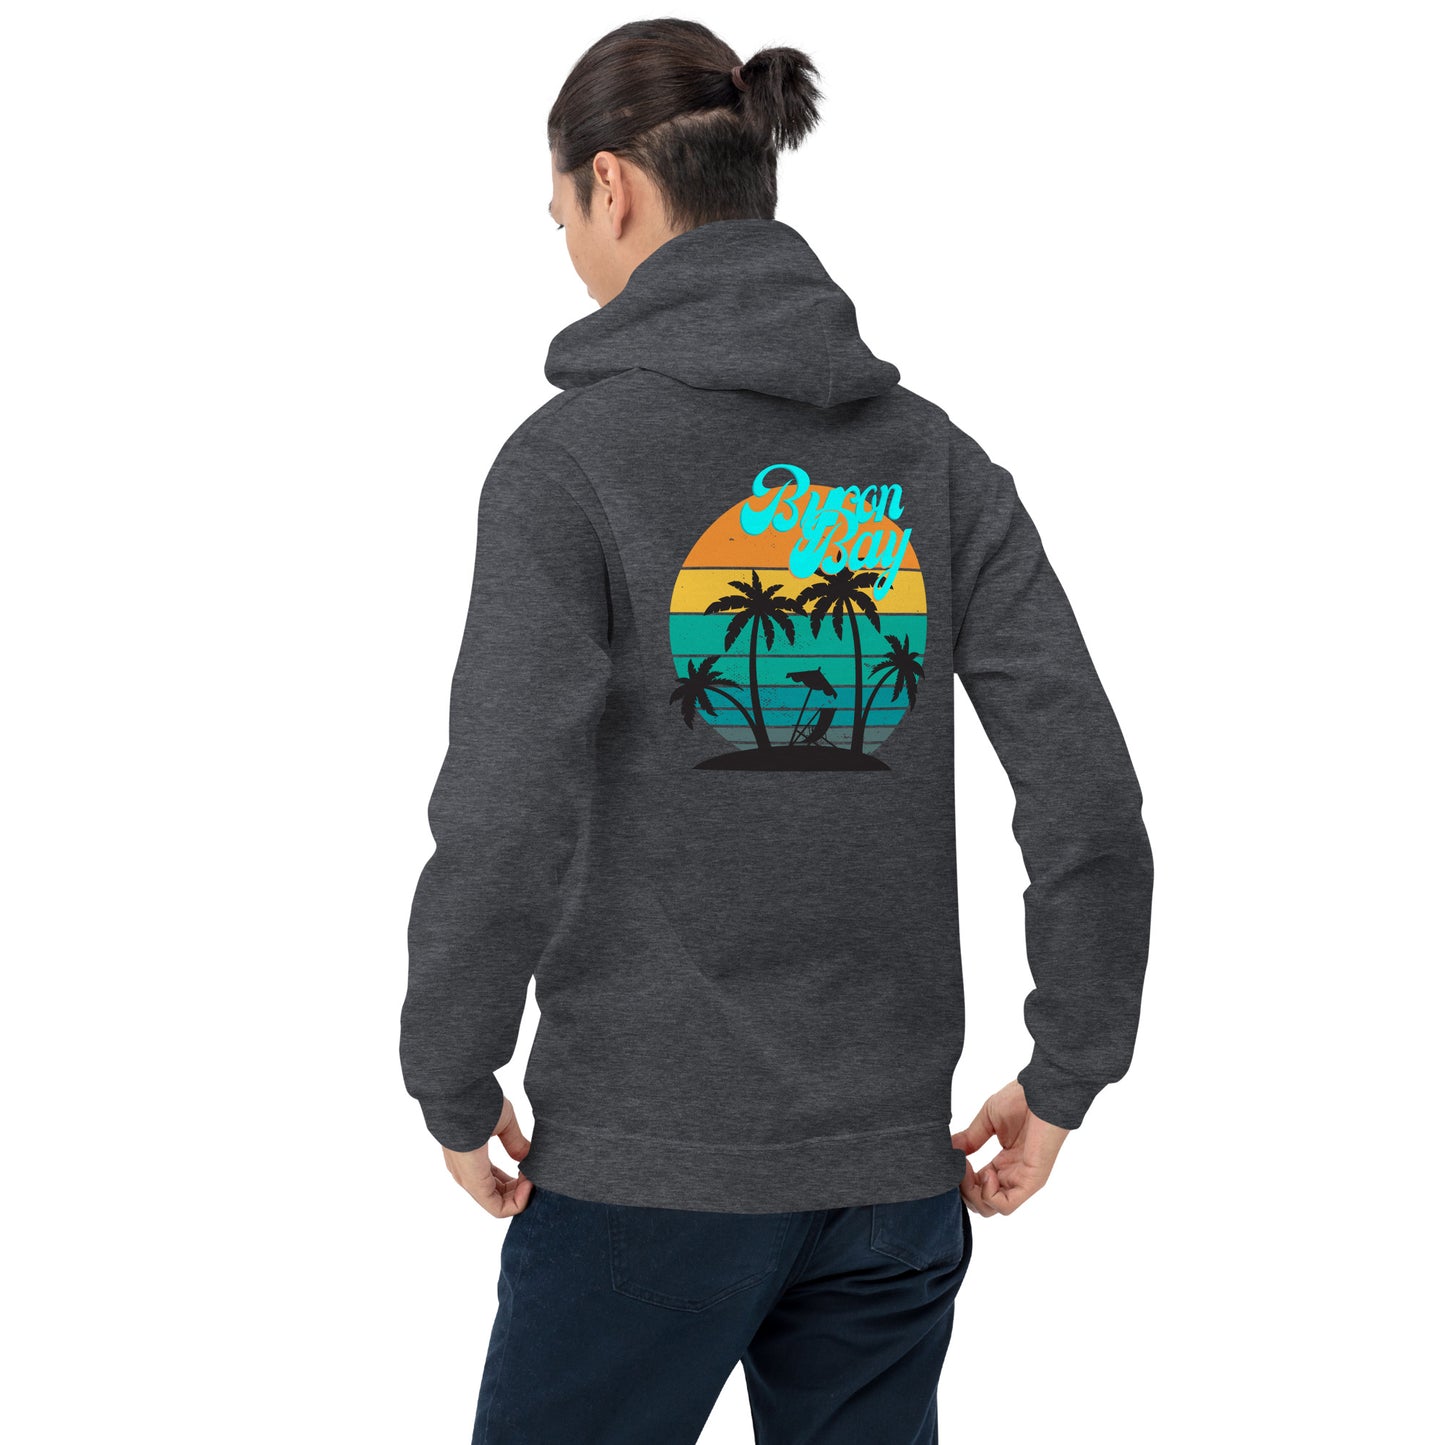  Unisex Hoodie - Dark Heather/Grey - Back view being warn by woman with her hands holding the bottom of the hoodie - Byron Bay design on back, plain front with pouch pocket - Genuine Byron Bay Merchandise | Produced by Go Sea Kayak Byron Bay 